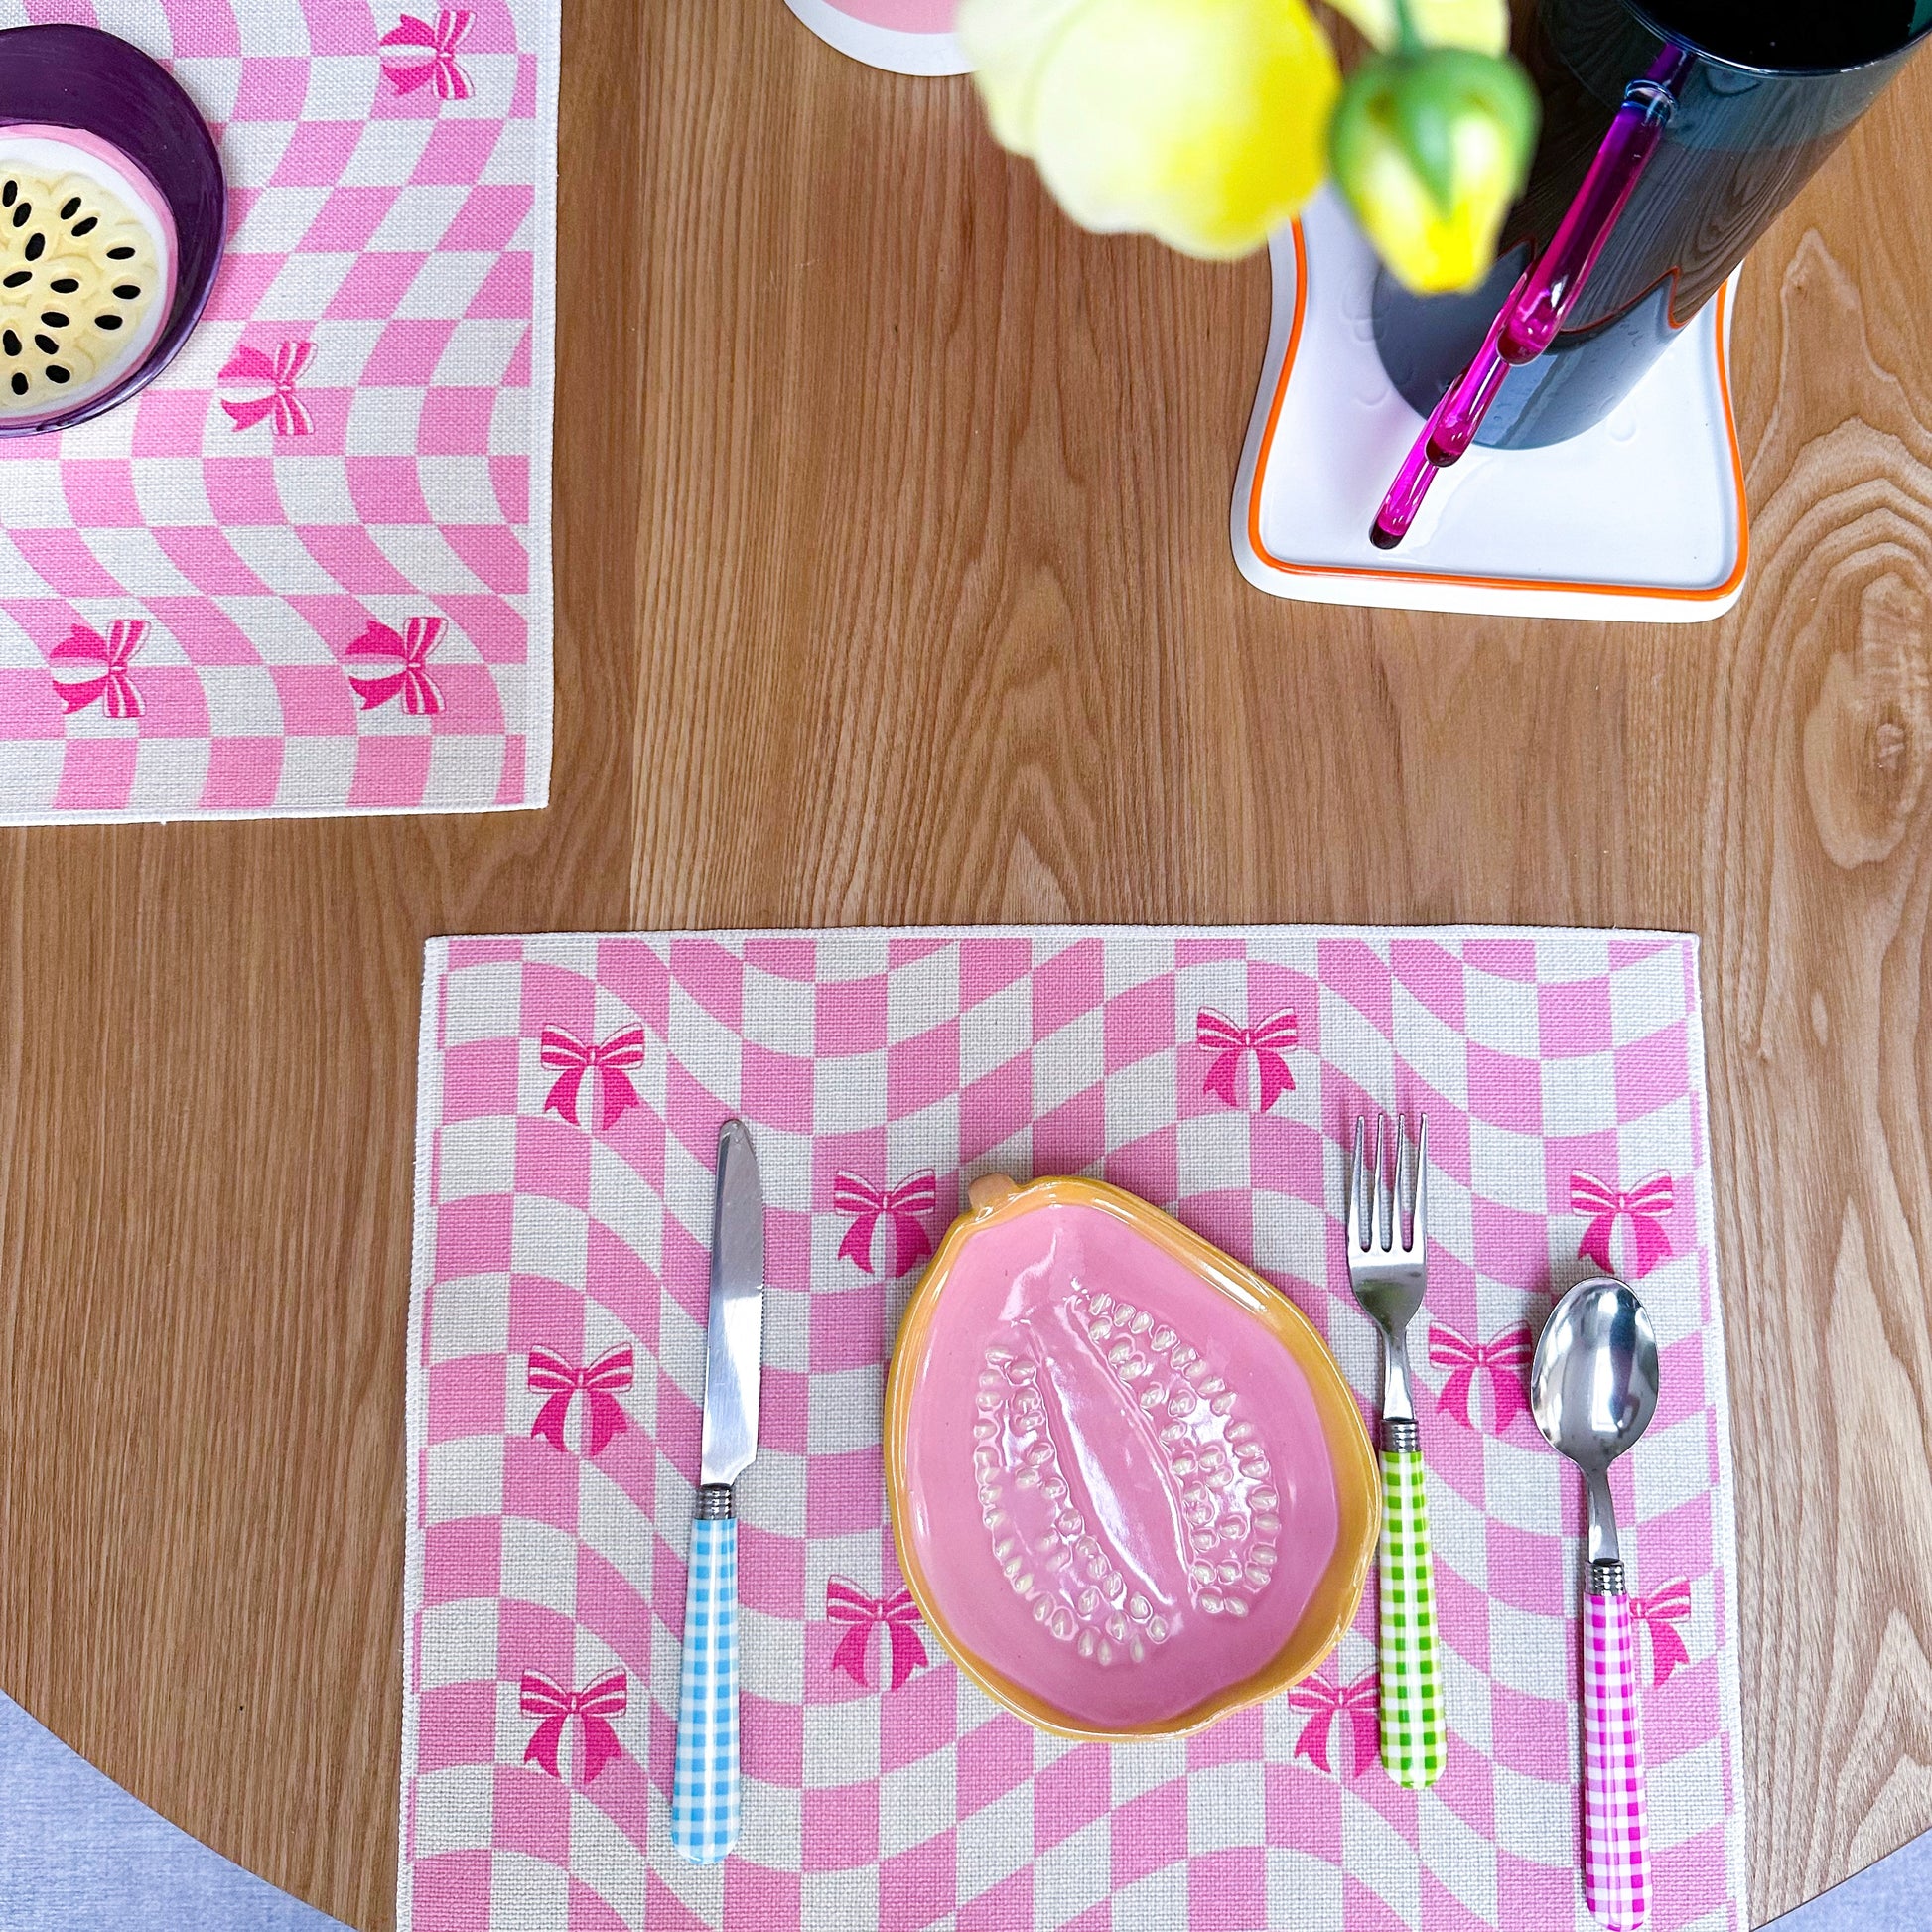 Checkered placemat with pink ribbons